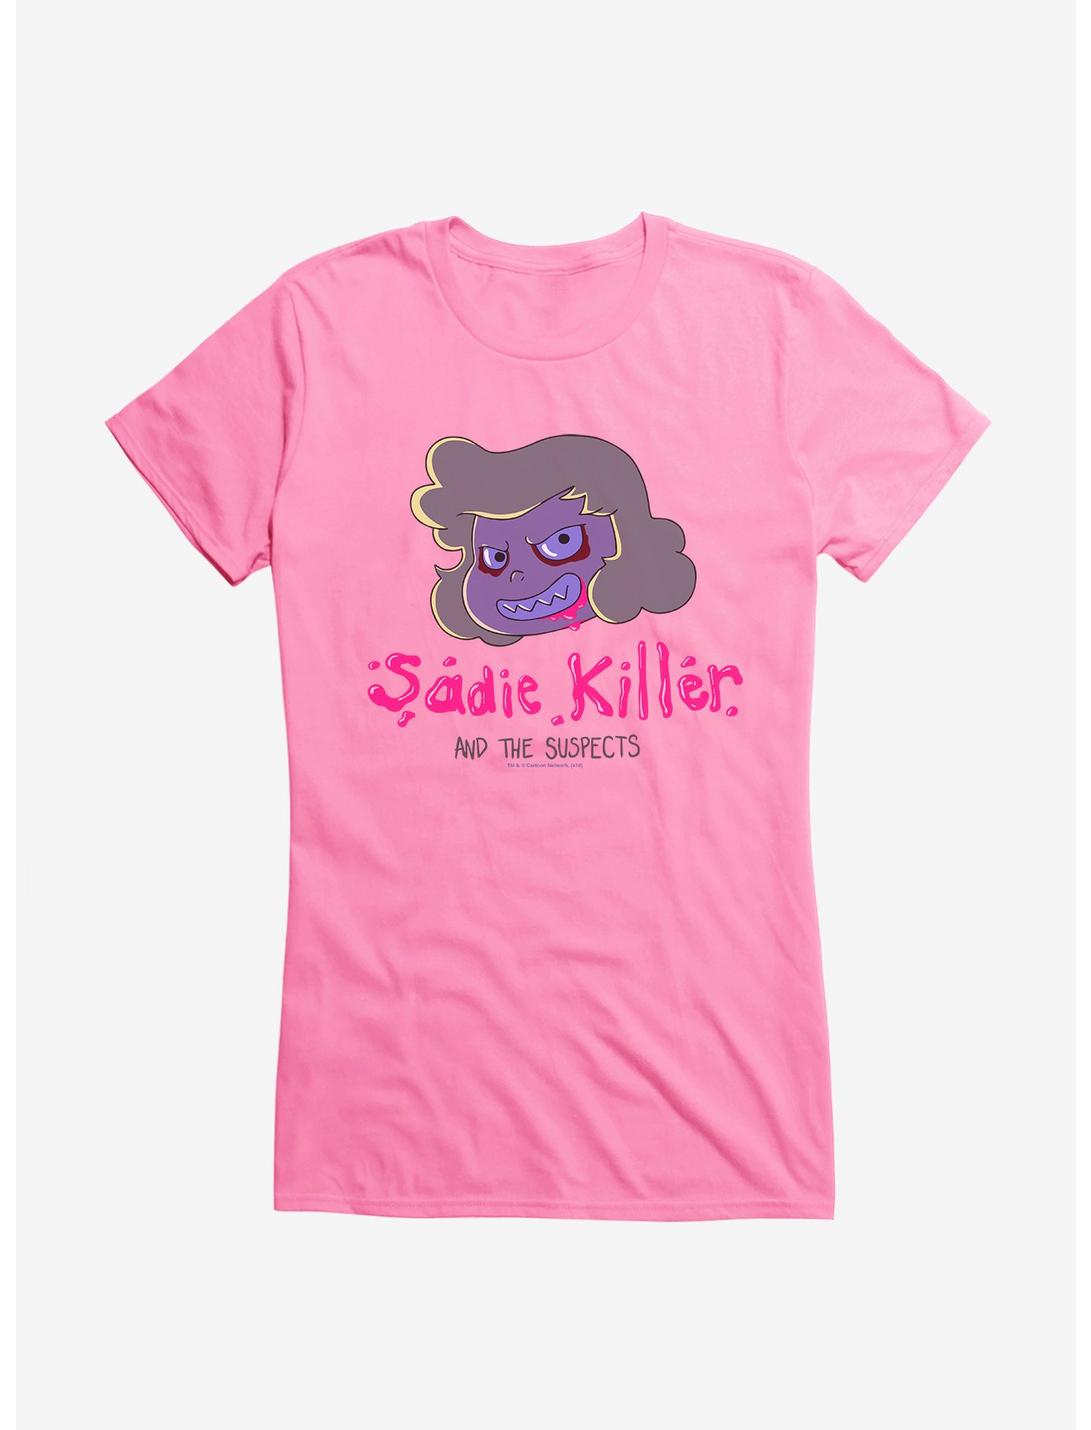 Steven Universe Sadie Killer And The Suspects Band Logo Girls T-Shirt, , hi-res